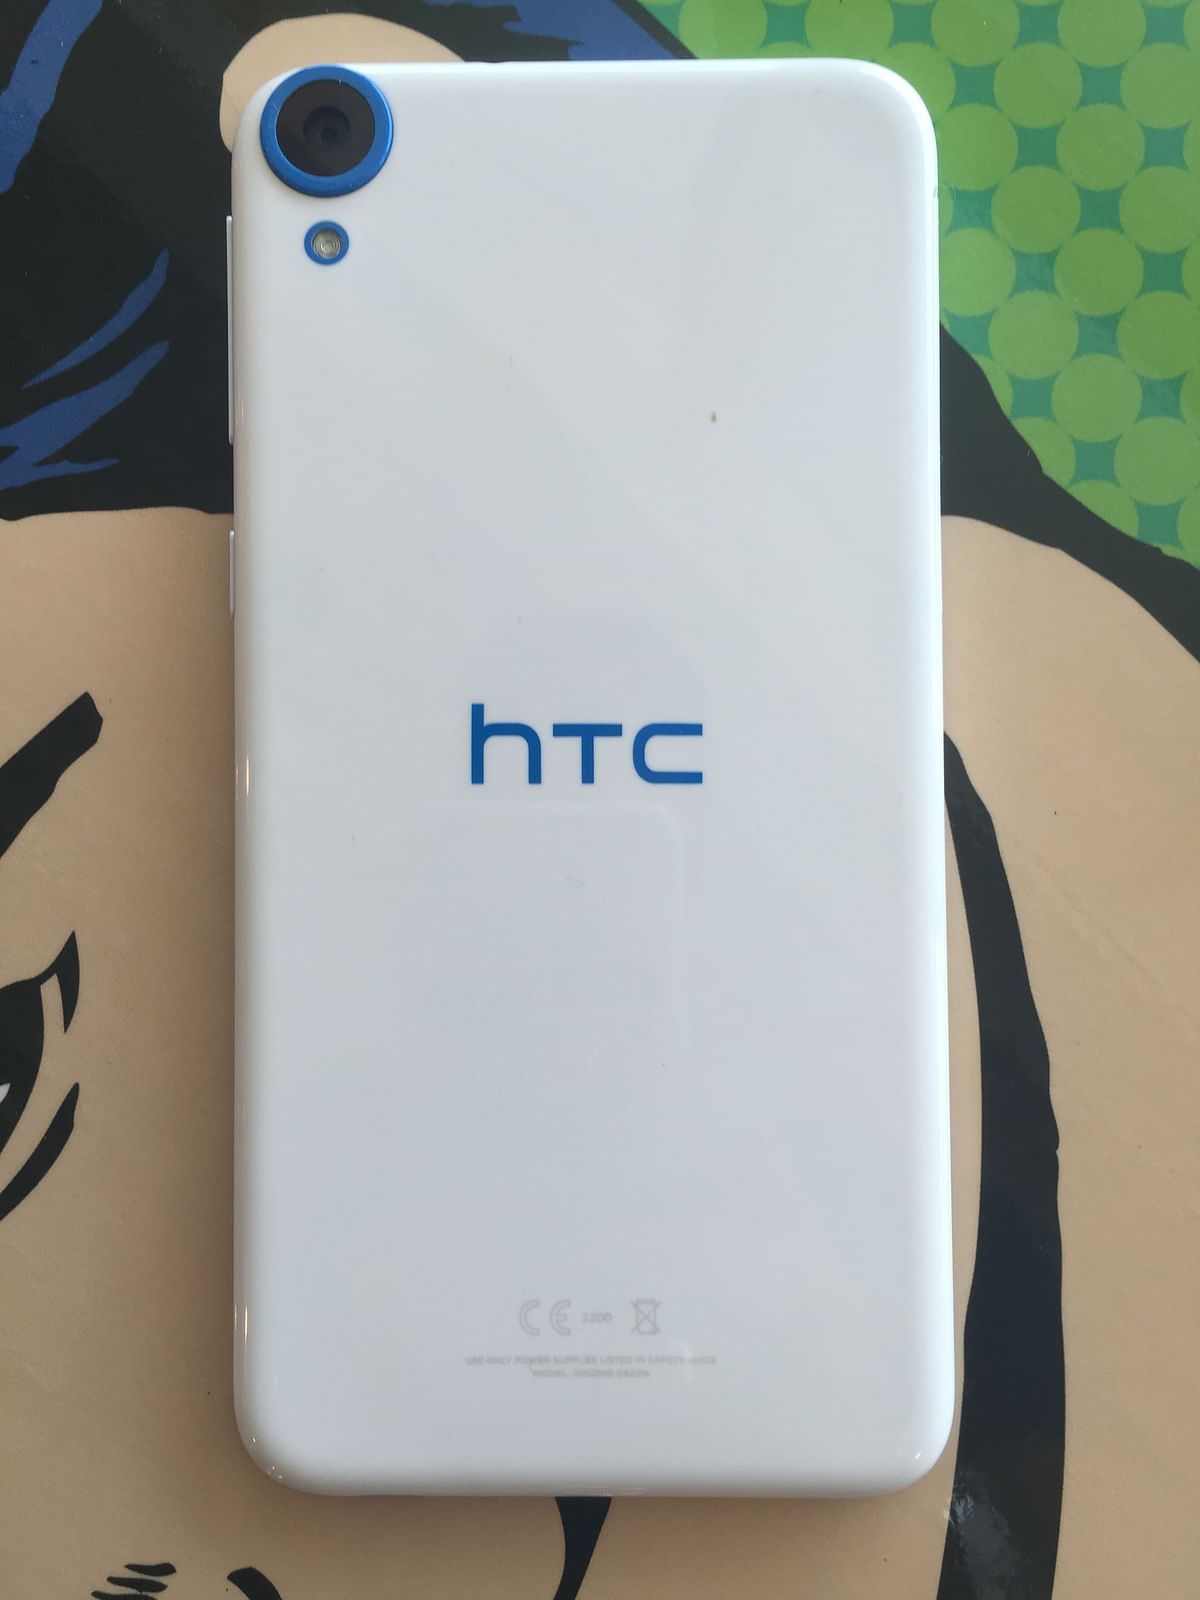 Here’s why the massive new smartphone, the HTC Desire 820s is great. And why it’s not.